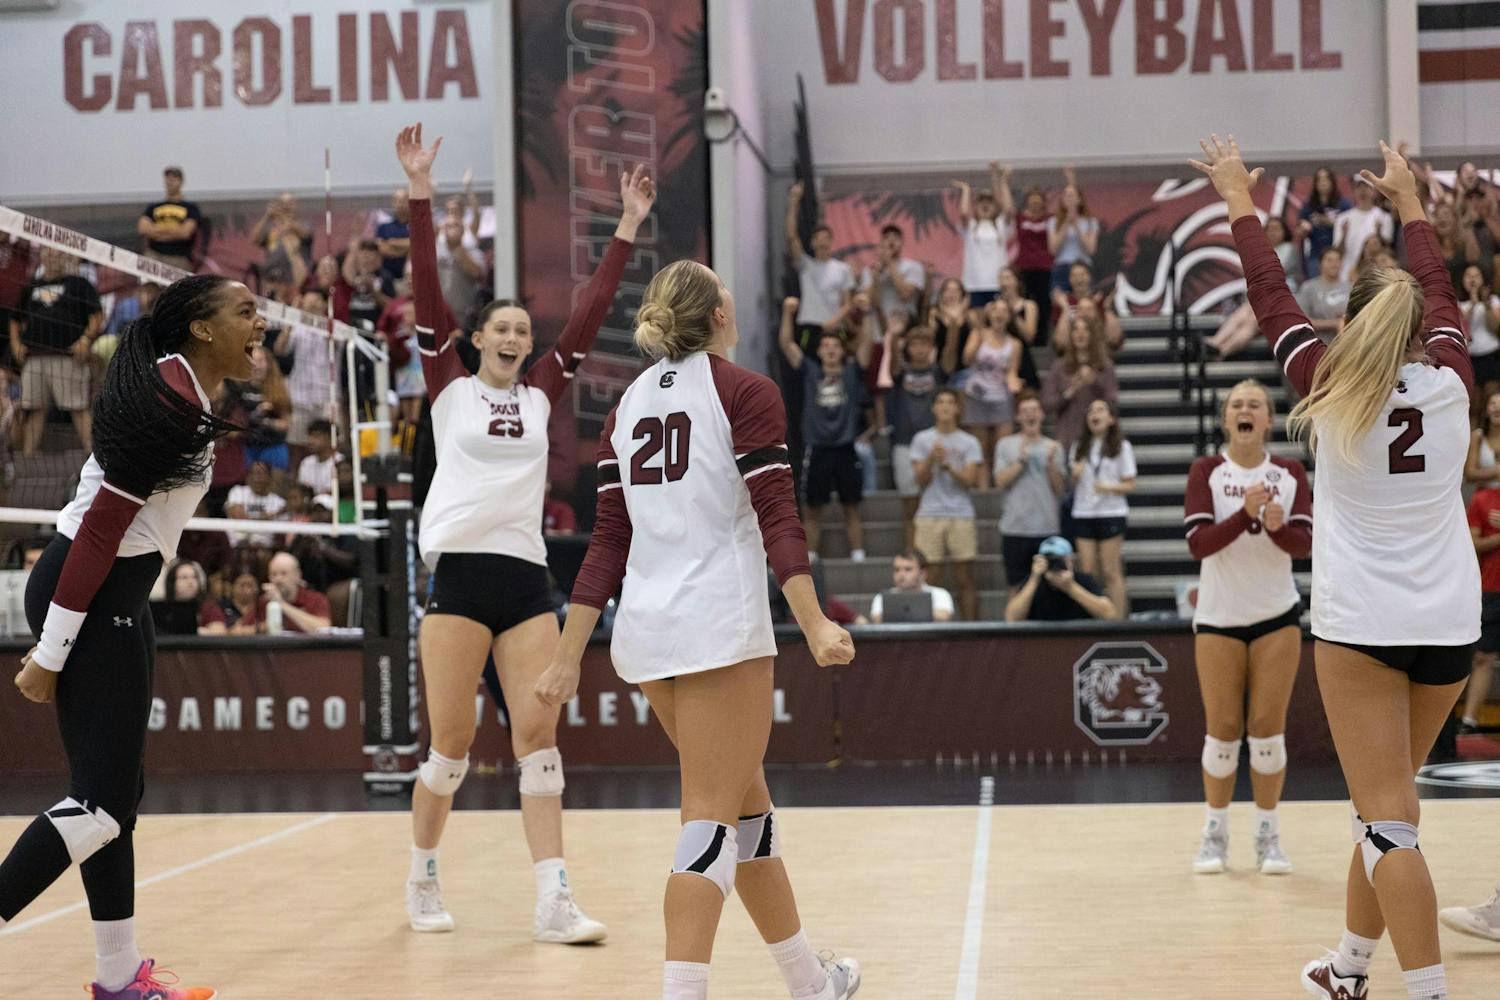 The USC women's volleyball team celebrates earning a point during its match against Towson University on Aug. 26. The Gamecocks defeated the Tigers 3-1 after losing 3-0 earlier in the weekend.